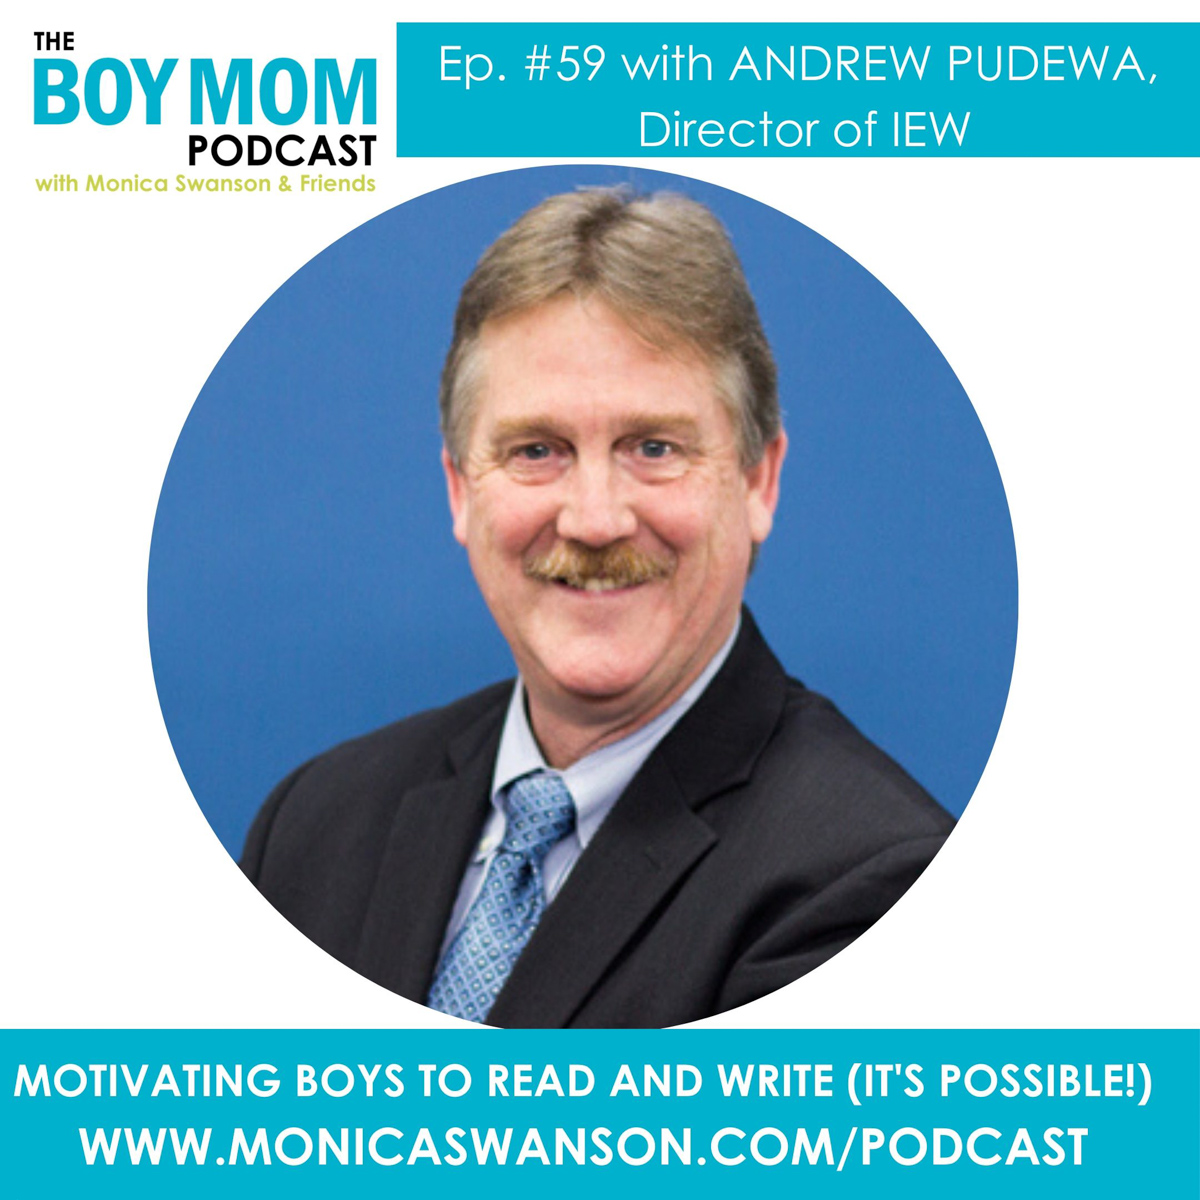 Motivating Boys to Read and Write. (It’s Possible!) {Episode 59 with Andrew Pudewa}